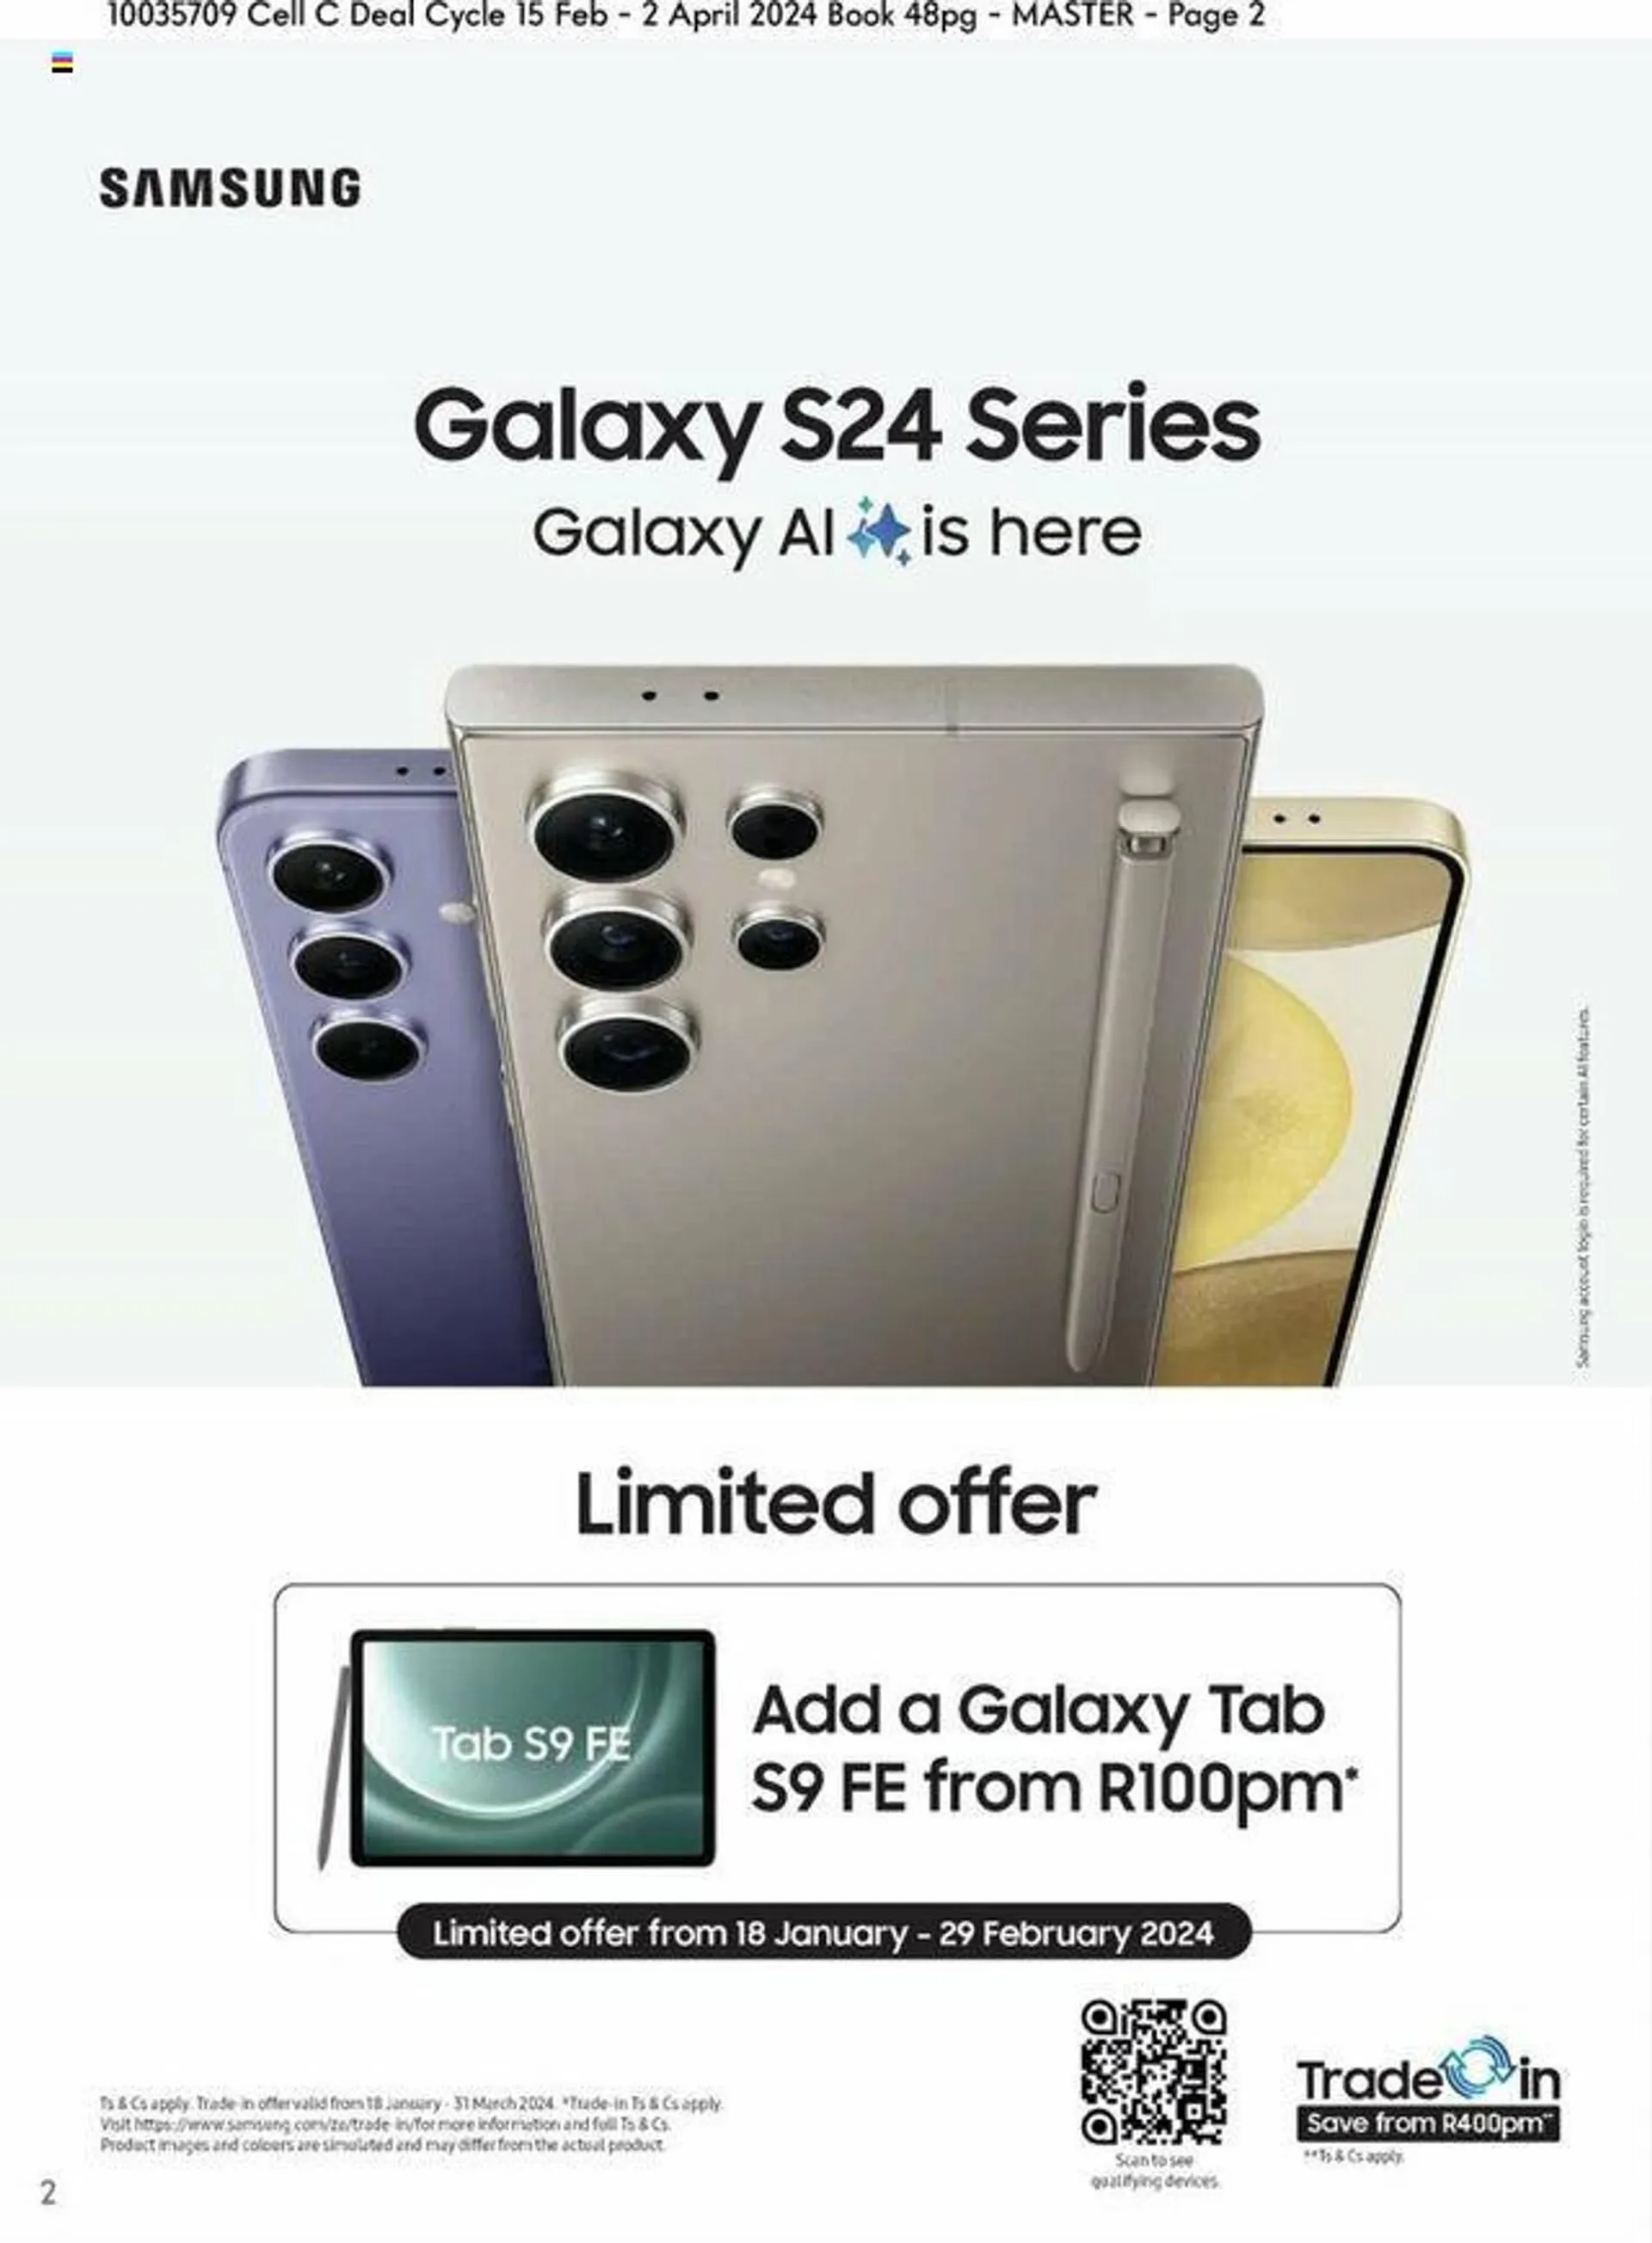 Cell C catalogue - 15 February 2 April 2024 - Page 2